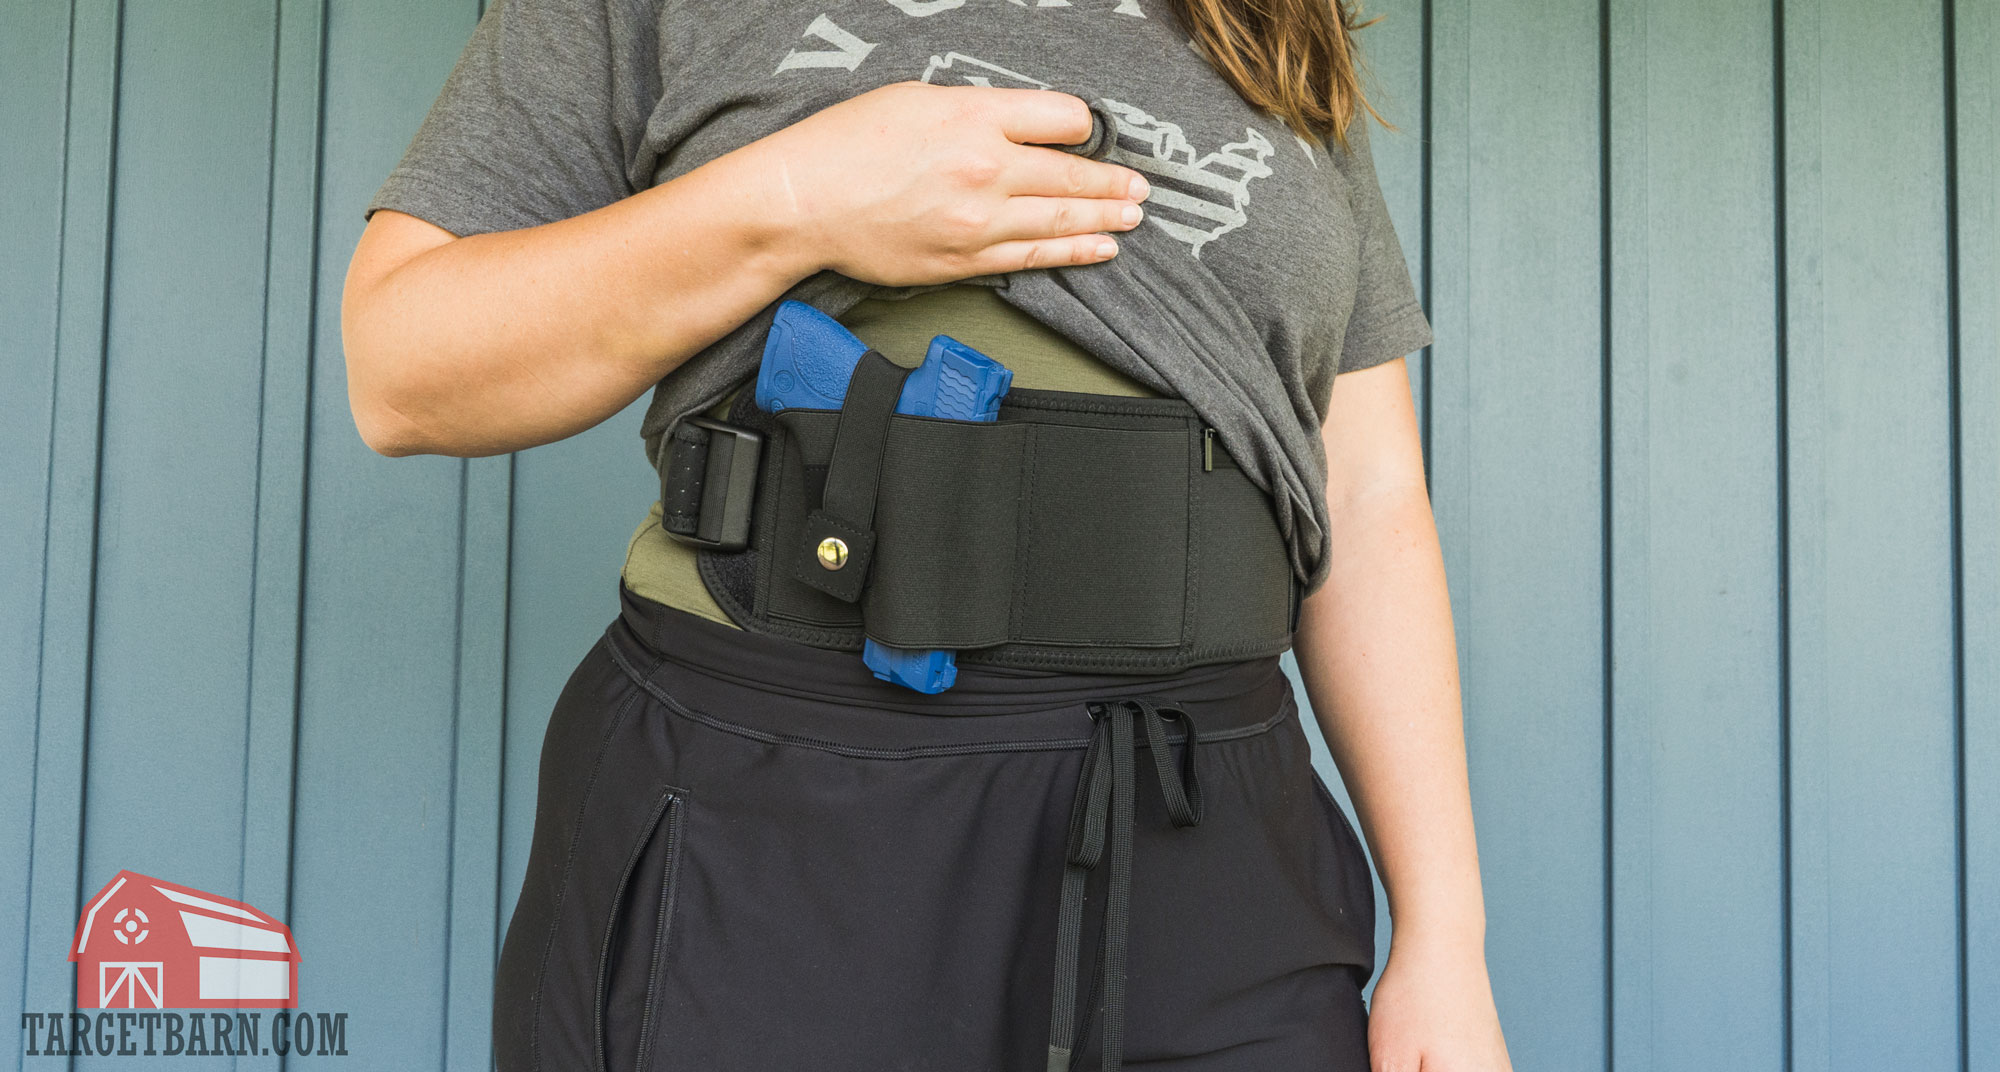 carrying a blue gun in a belly bad holster